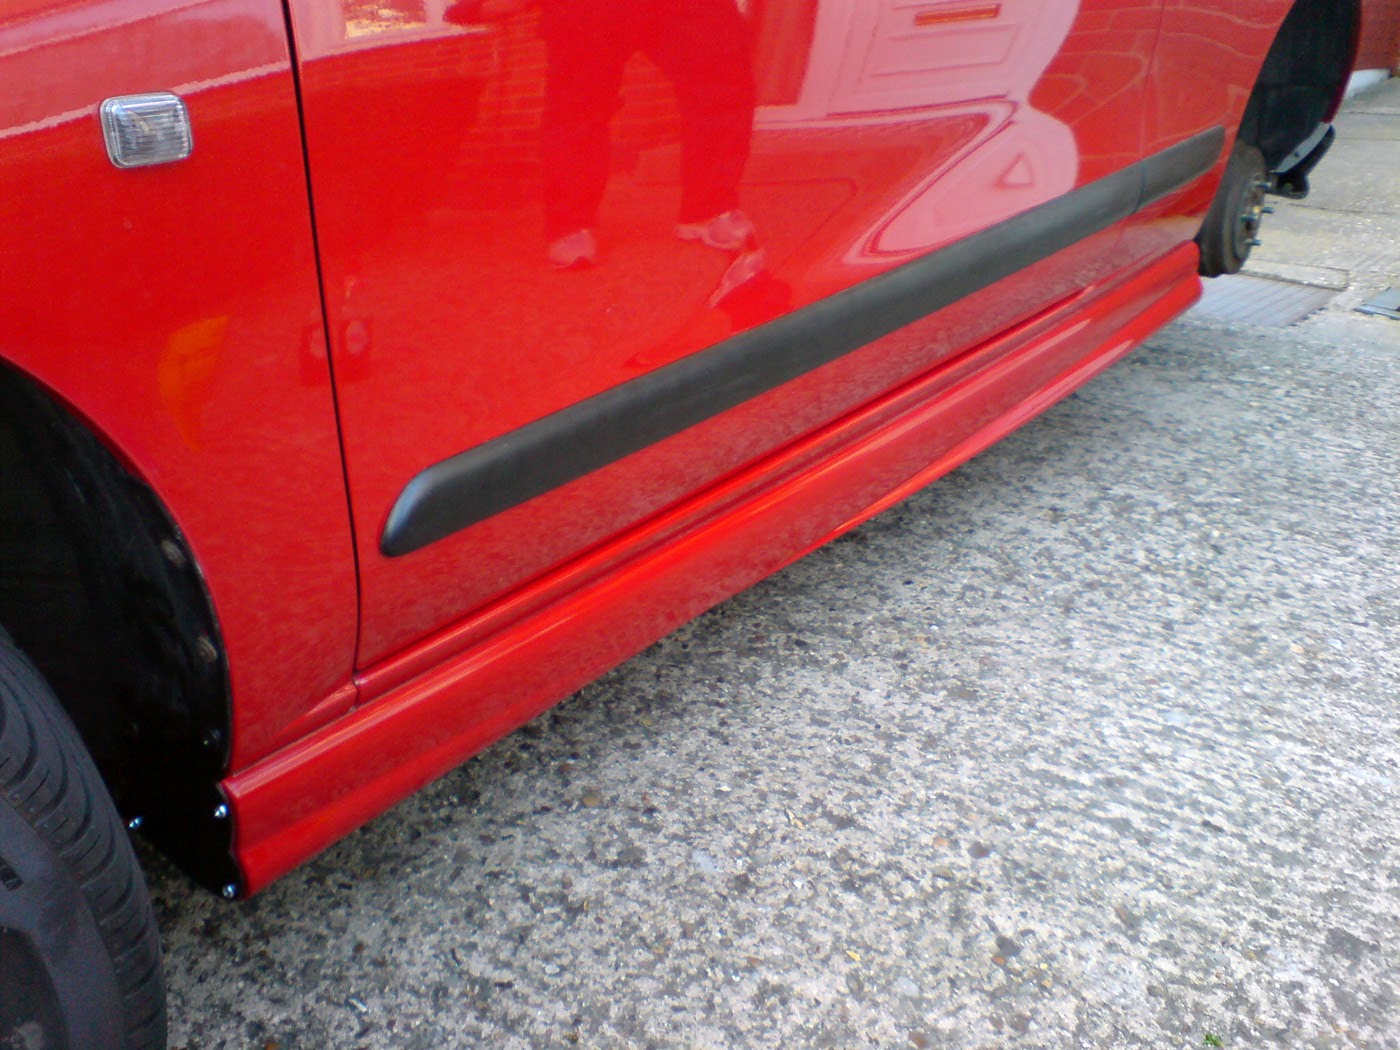 MG ZR Rover 25 with side skirts